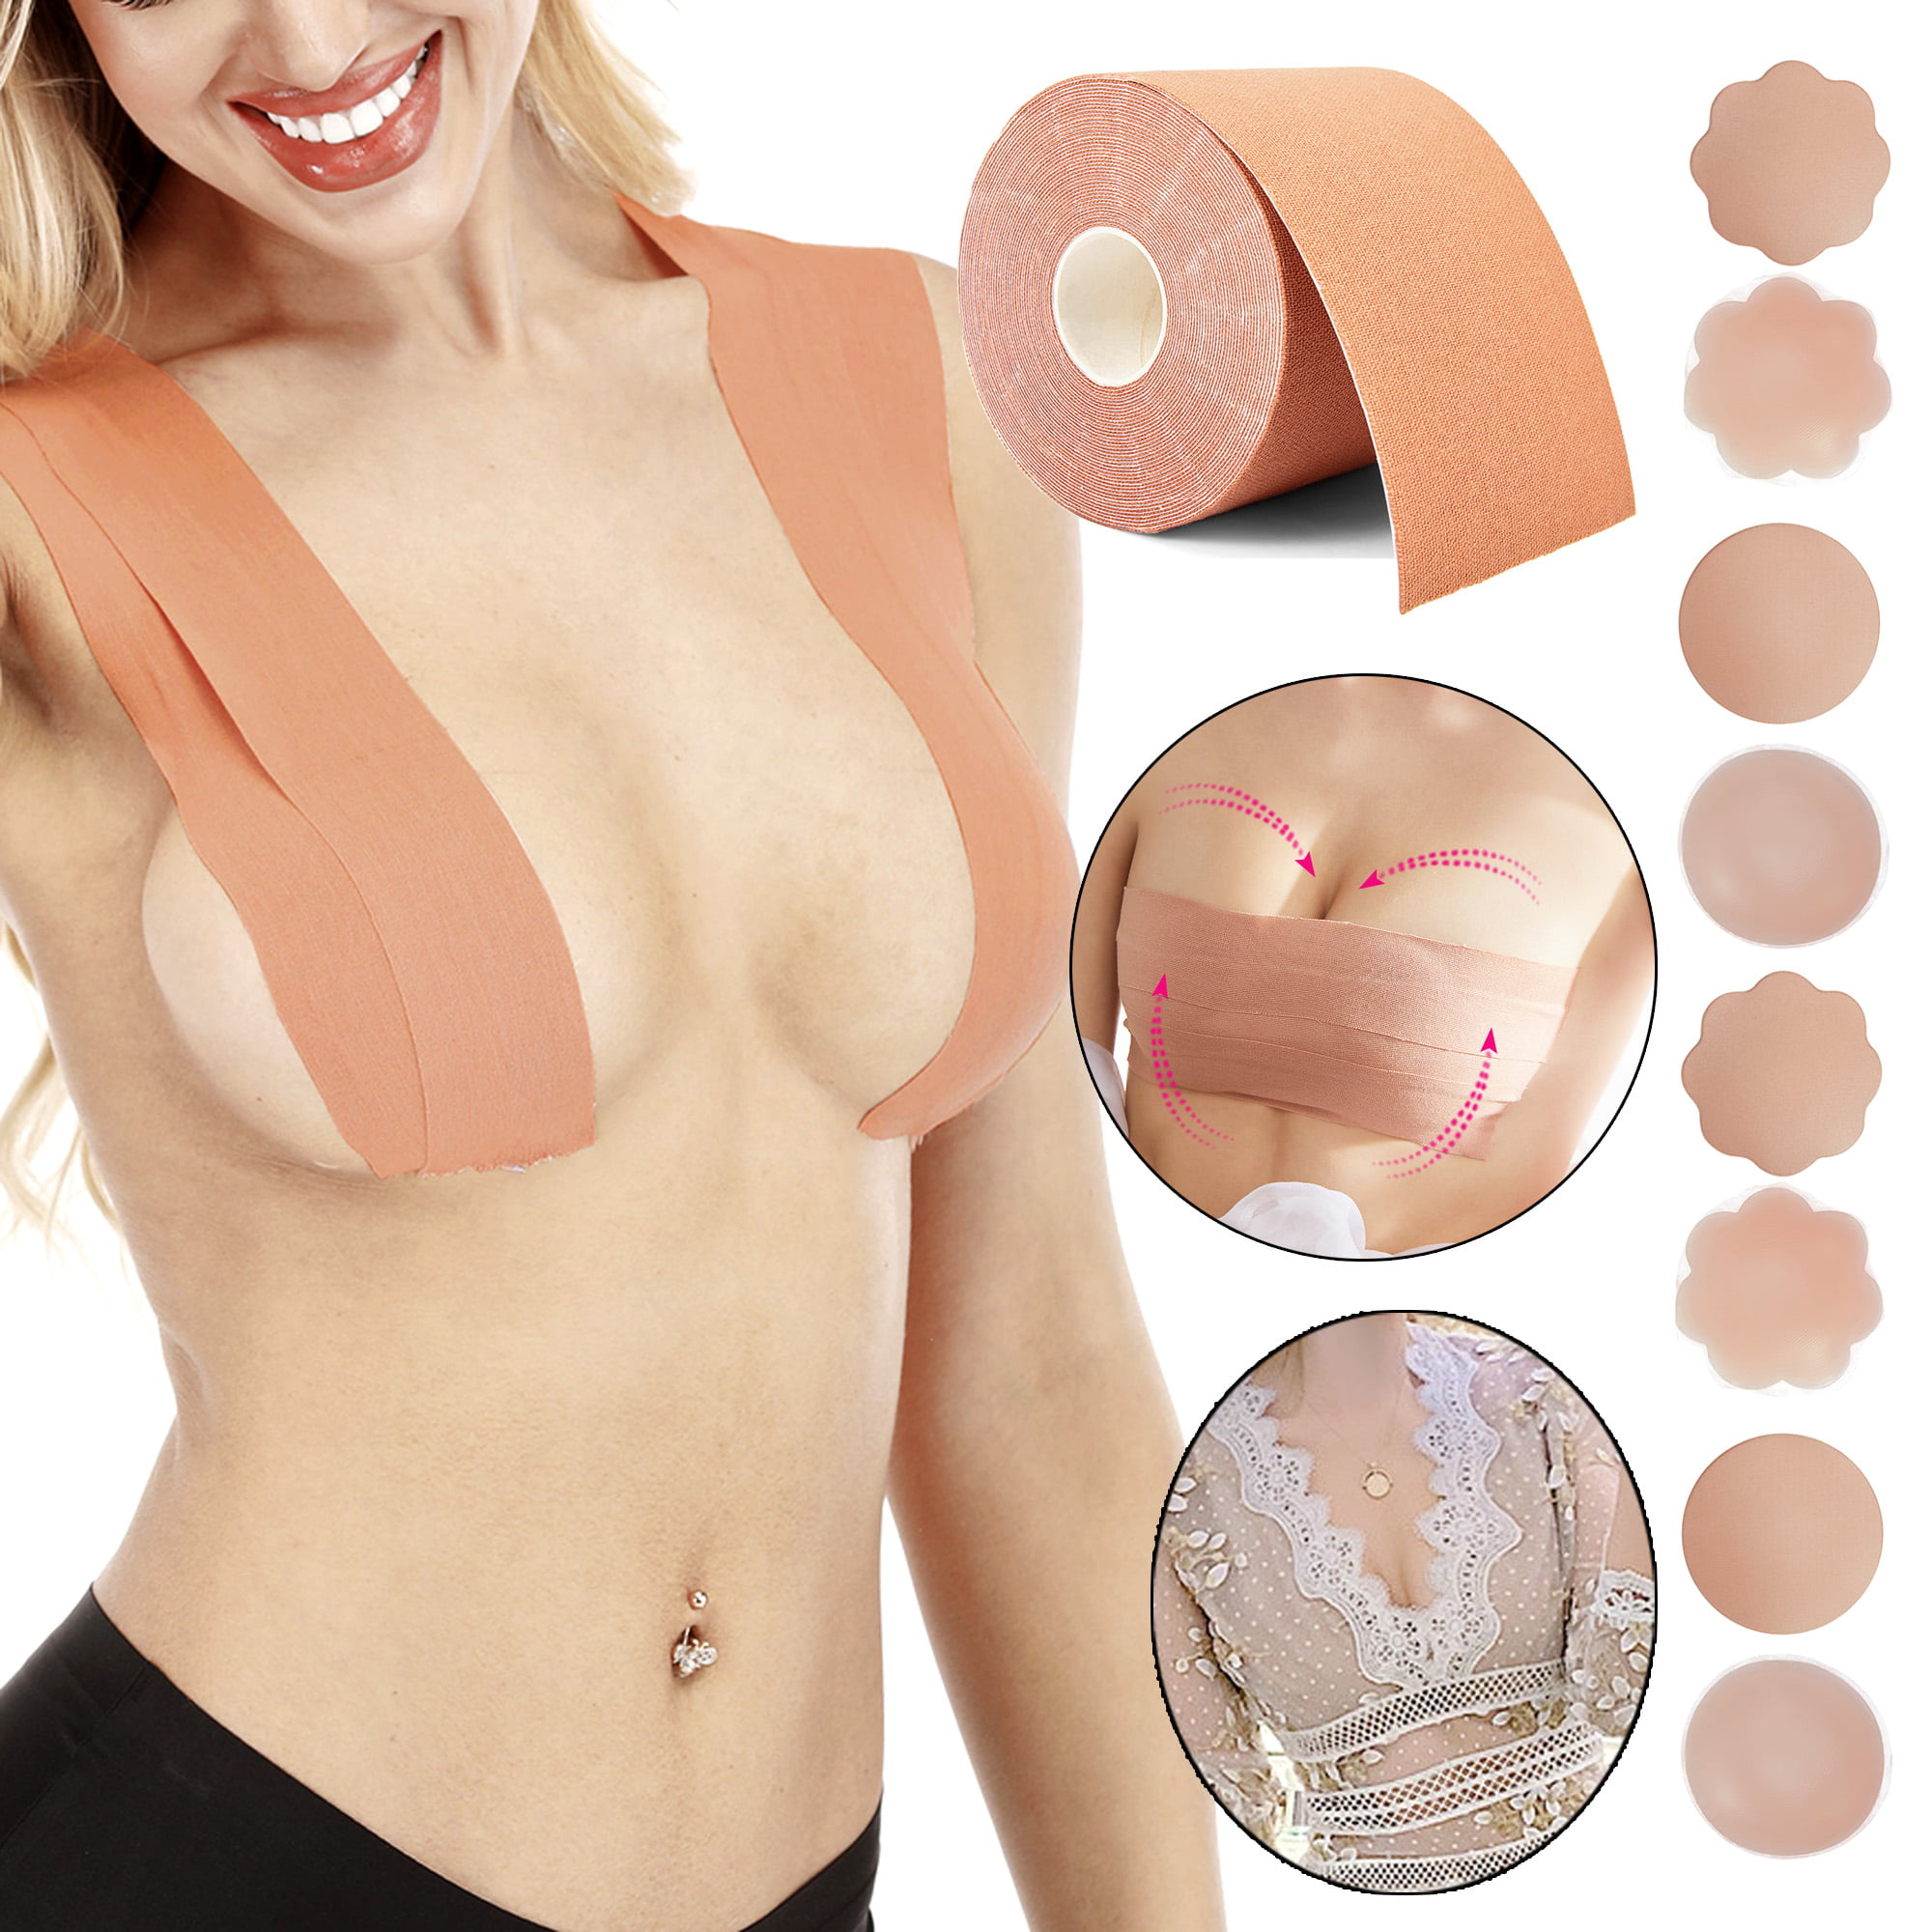 Newhomestyle Boob Tape with 10 pcs Flower Shaped Nipple Covers, Waterproof  & Breathable Breast Lift Tape for A-E Cup large Breasts, Breast Tape Chest  Support Tape : : Fashion